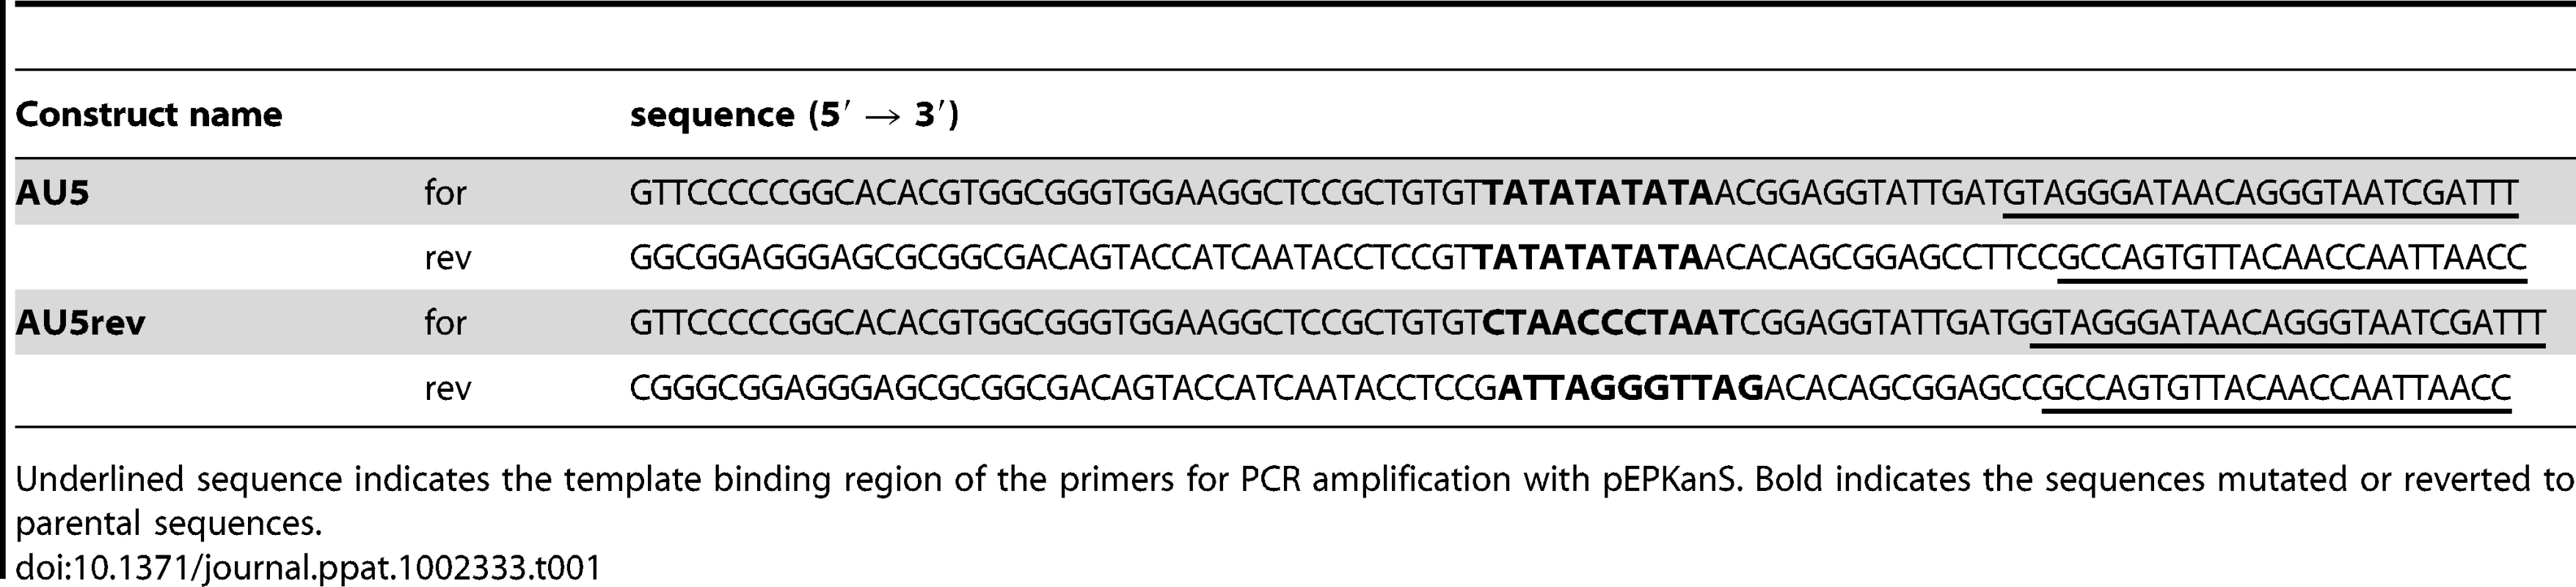 Primers used for cloning and generation of mutant and revertant AU5 constructs.